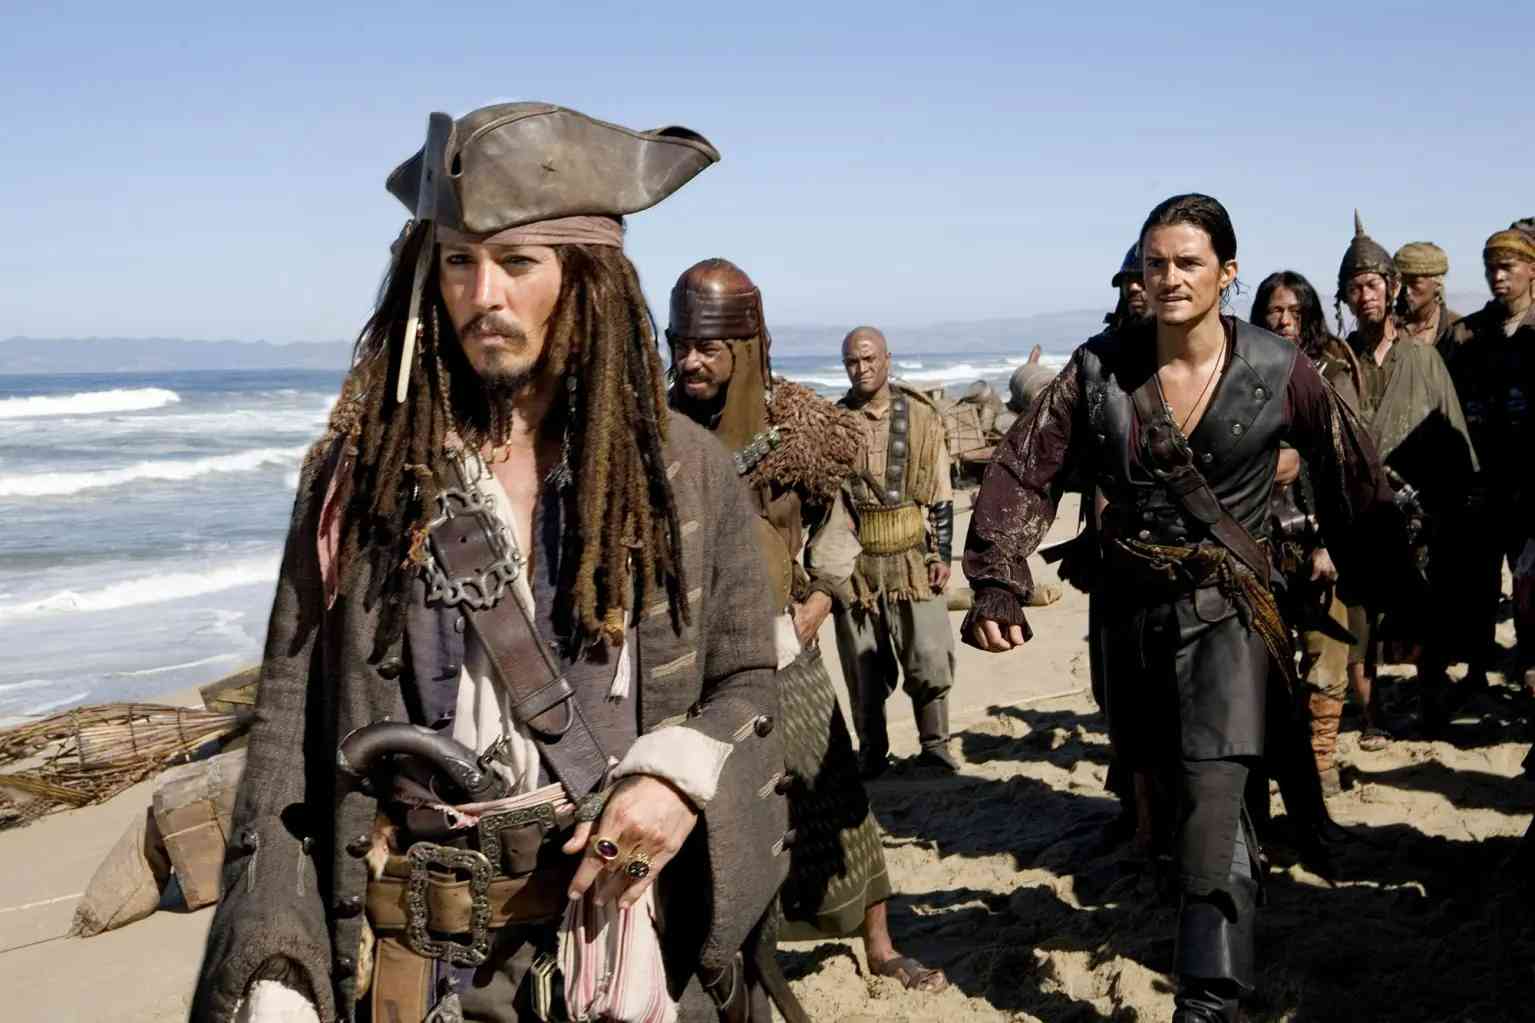 Pirates-of-the-Caribbean:-At-World's-End-(2007)